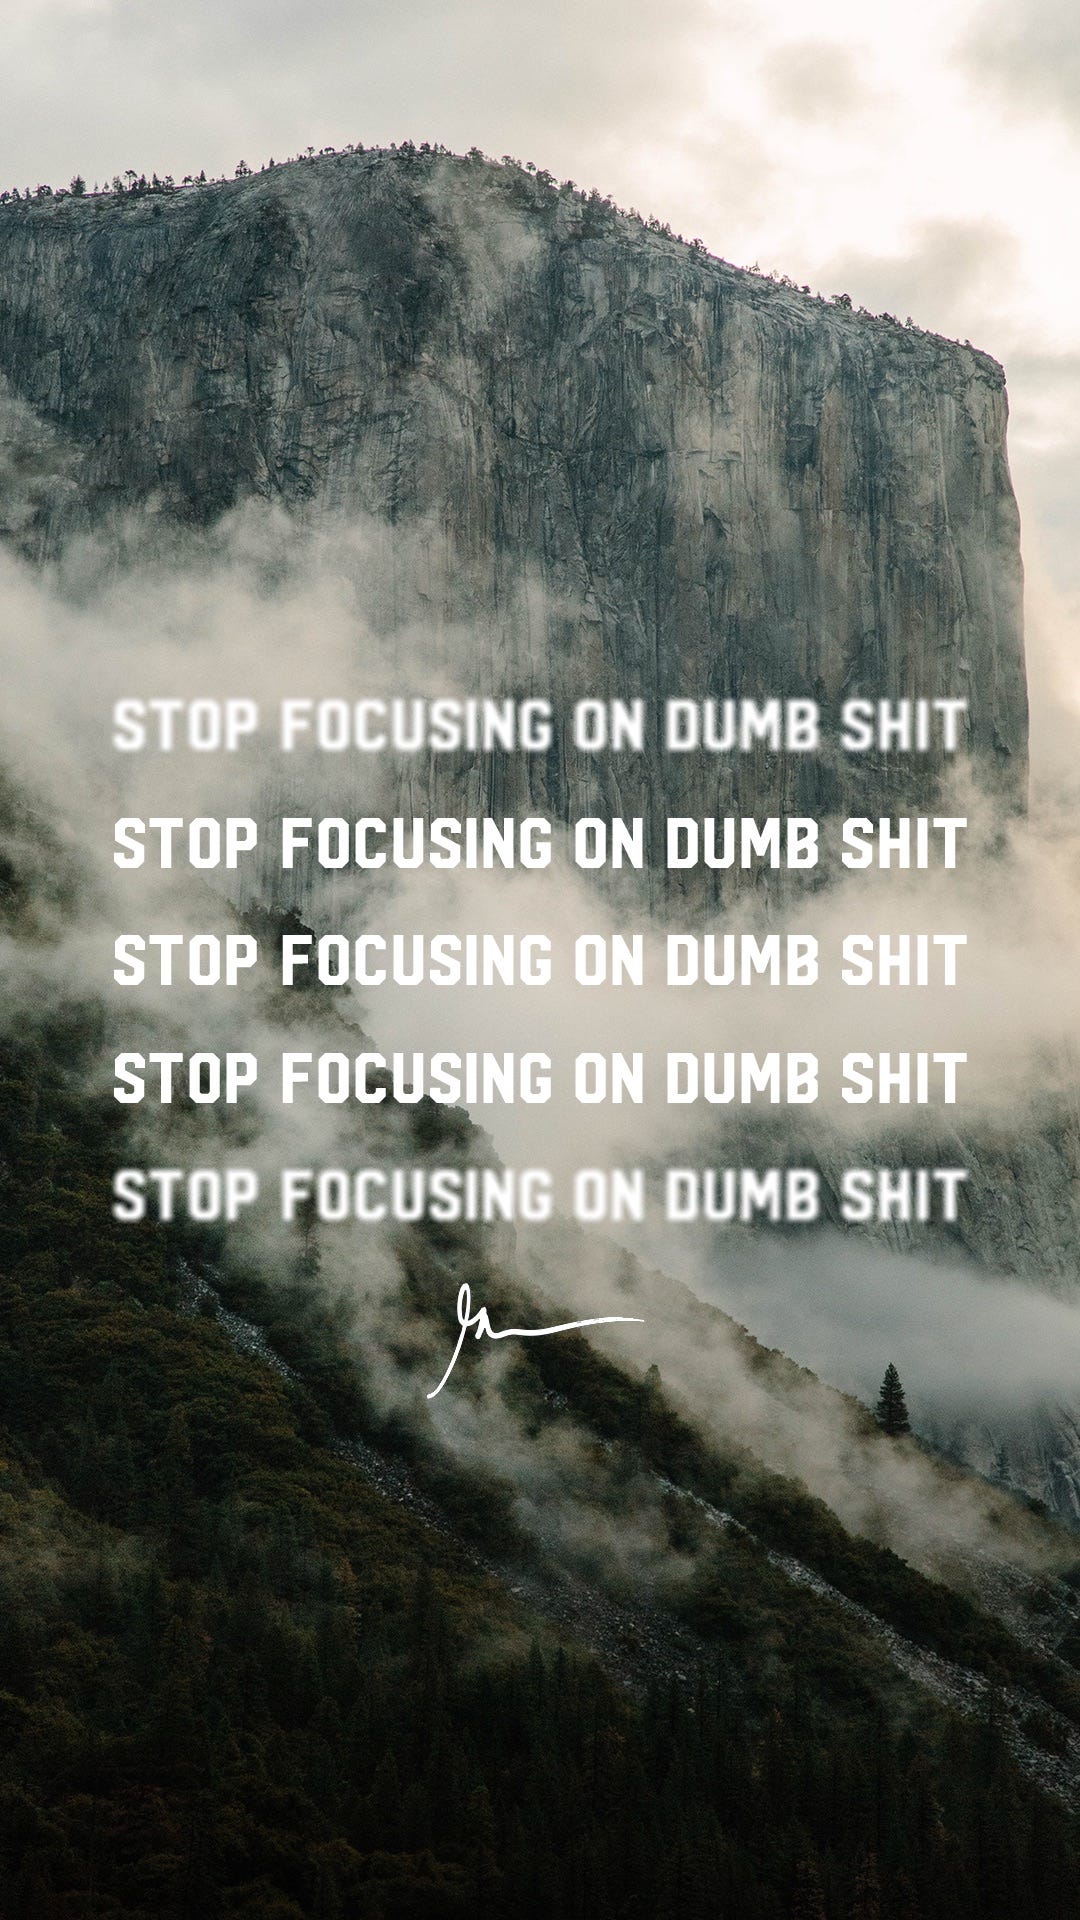 Fuck The Dumb Shit - GaryVee WallPapers. Many of you have been asking me for theâ€¦ | by Gary  Vaynerchuk | Medium